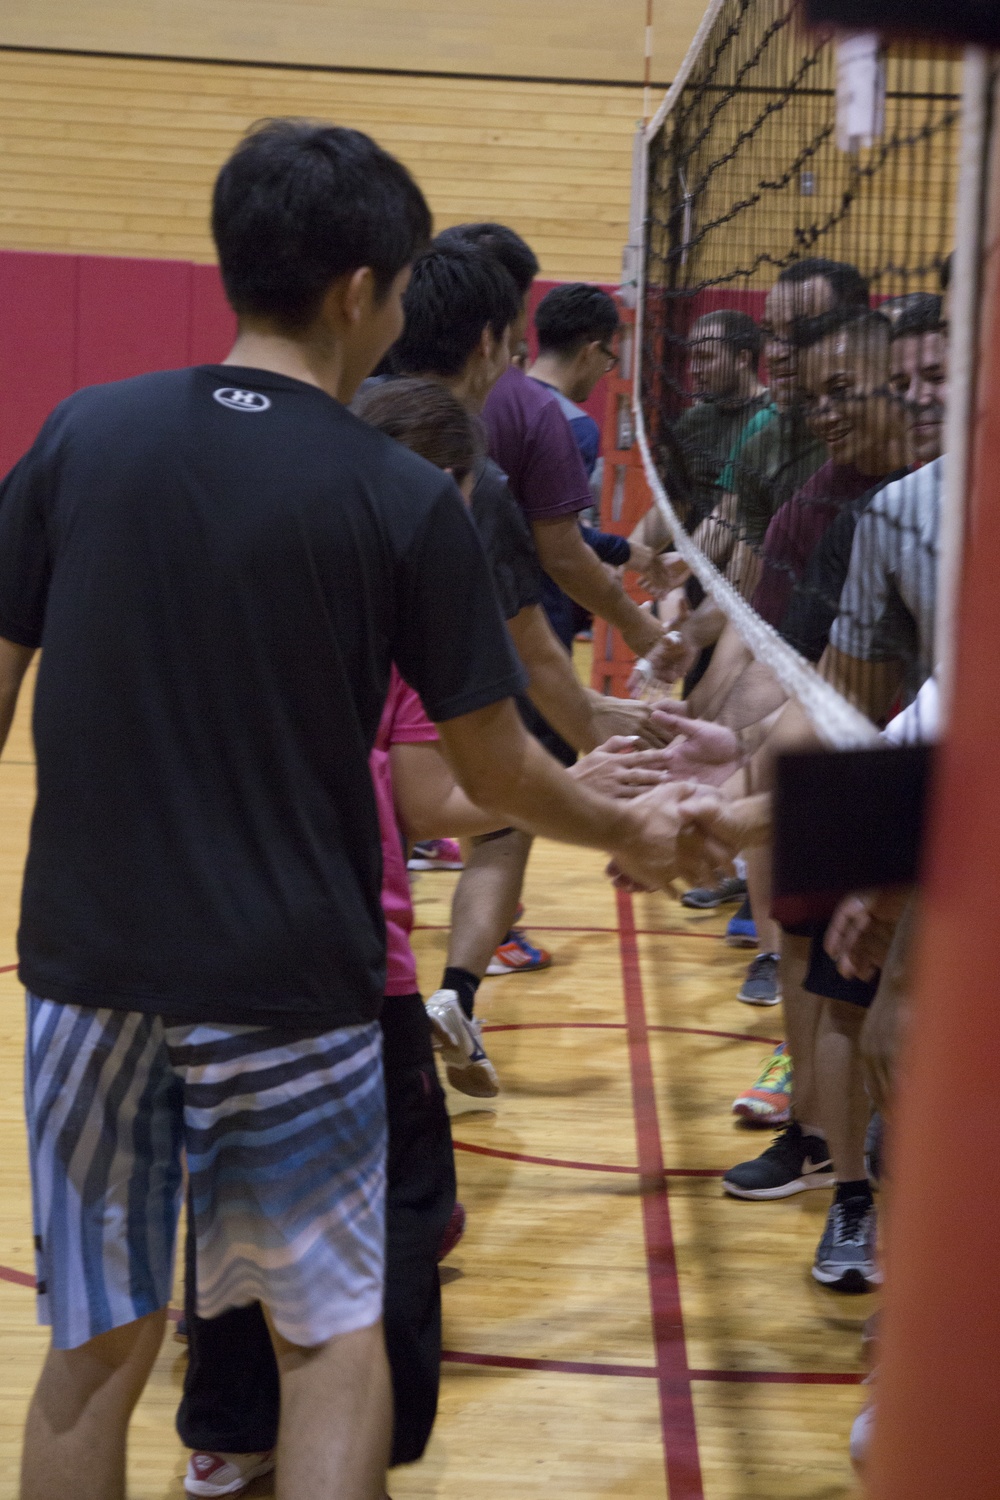 Kitanakagusuku International Friendship Association and Camp Foster compete in a Friendship Volleyball Event